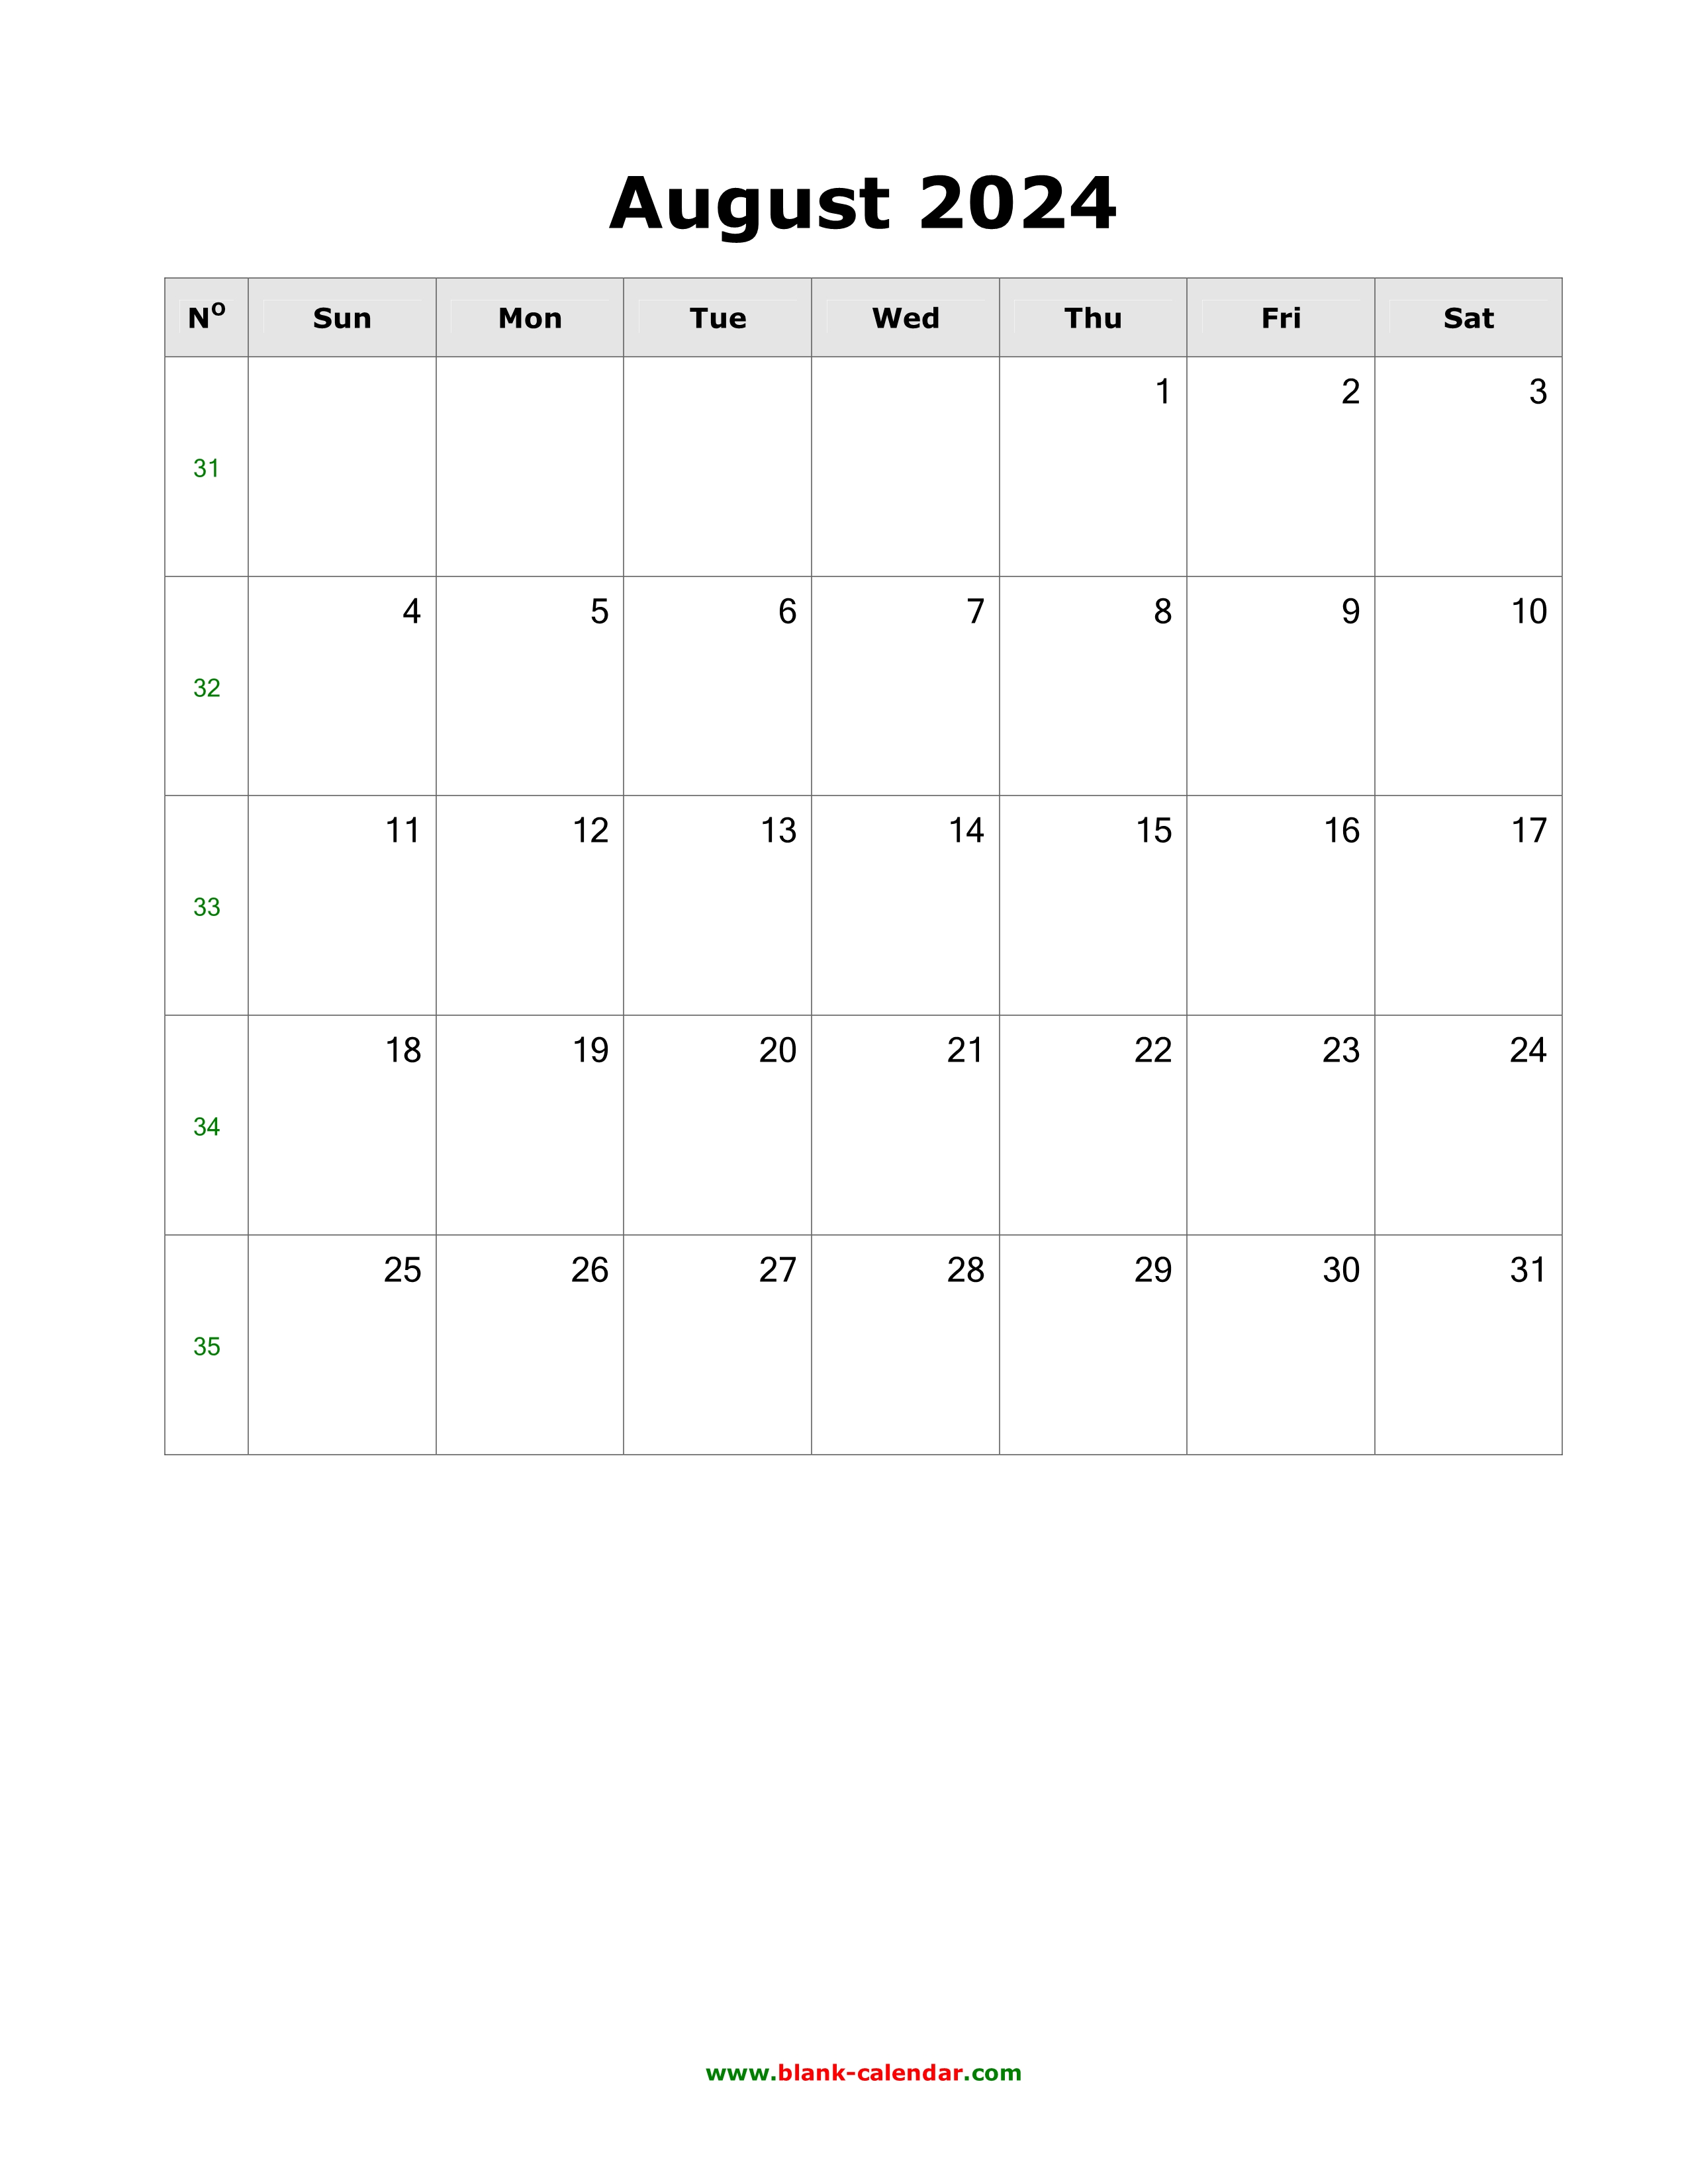 Download August 2024 Blank Calendar with US Holidays (vertical)